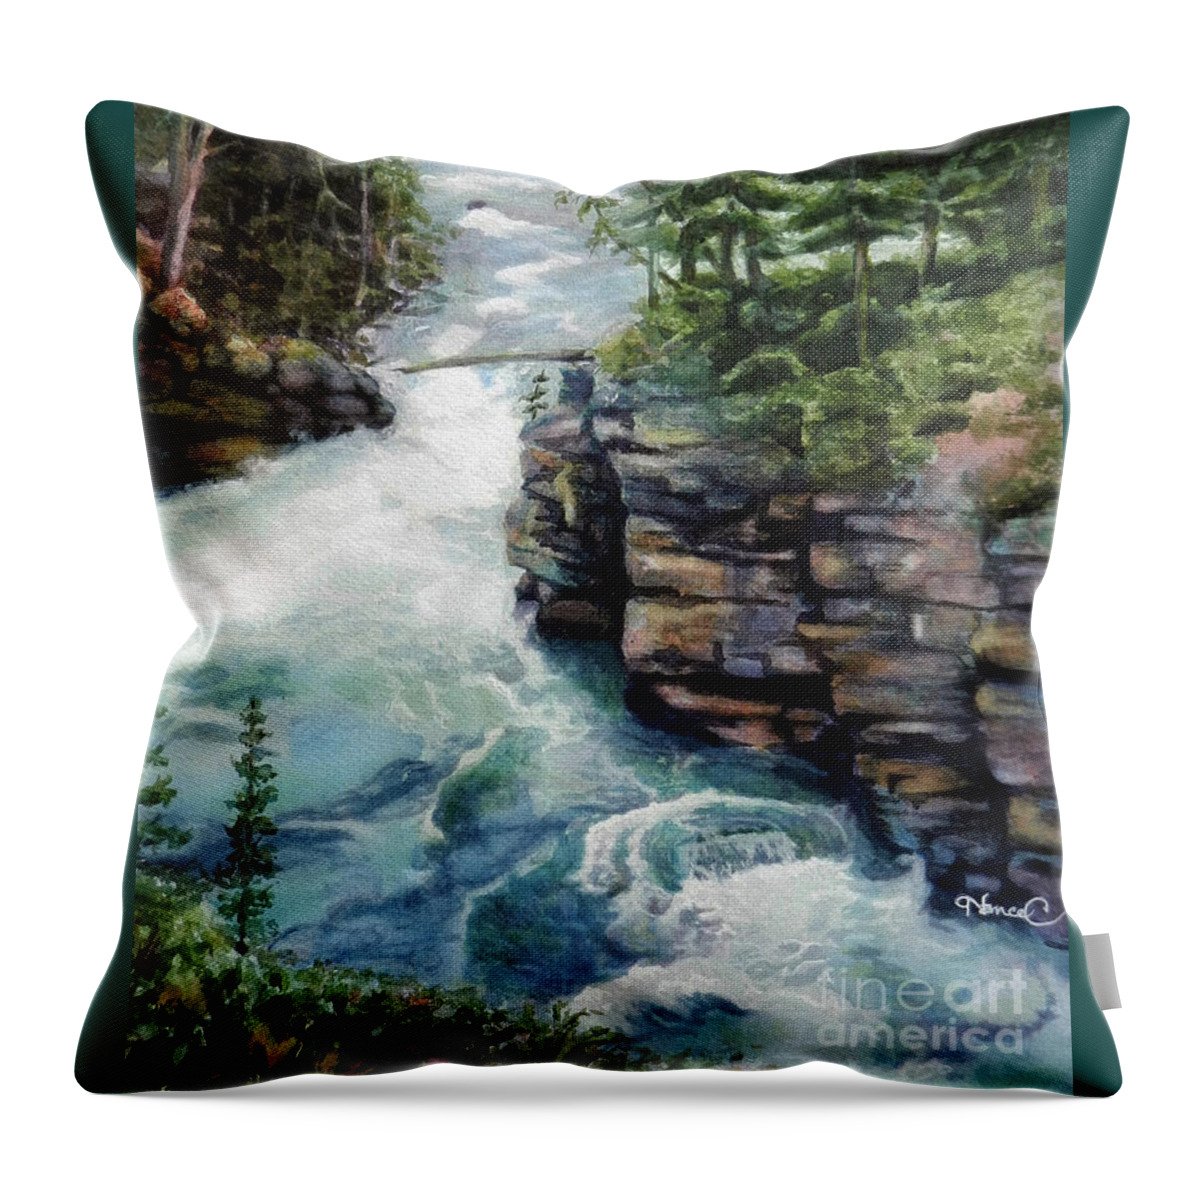 Nancy Charbeneau Throw Pillow featuring the painting Cool River by Nancy Charbeneau